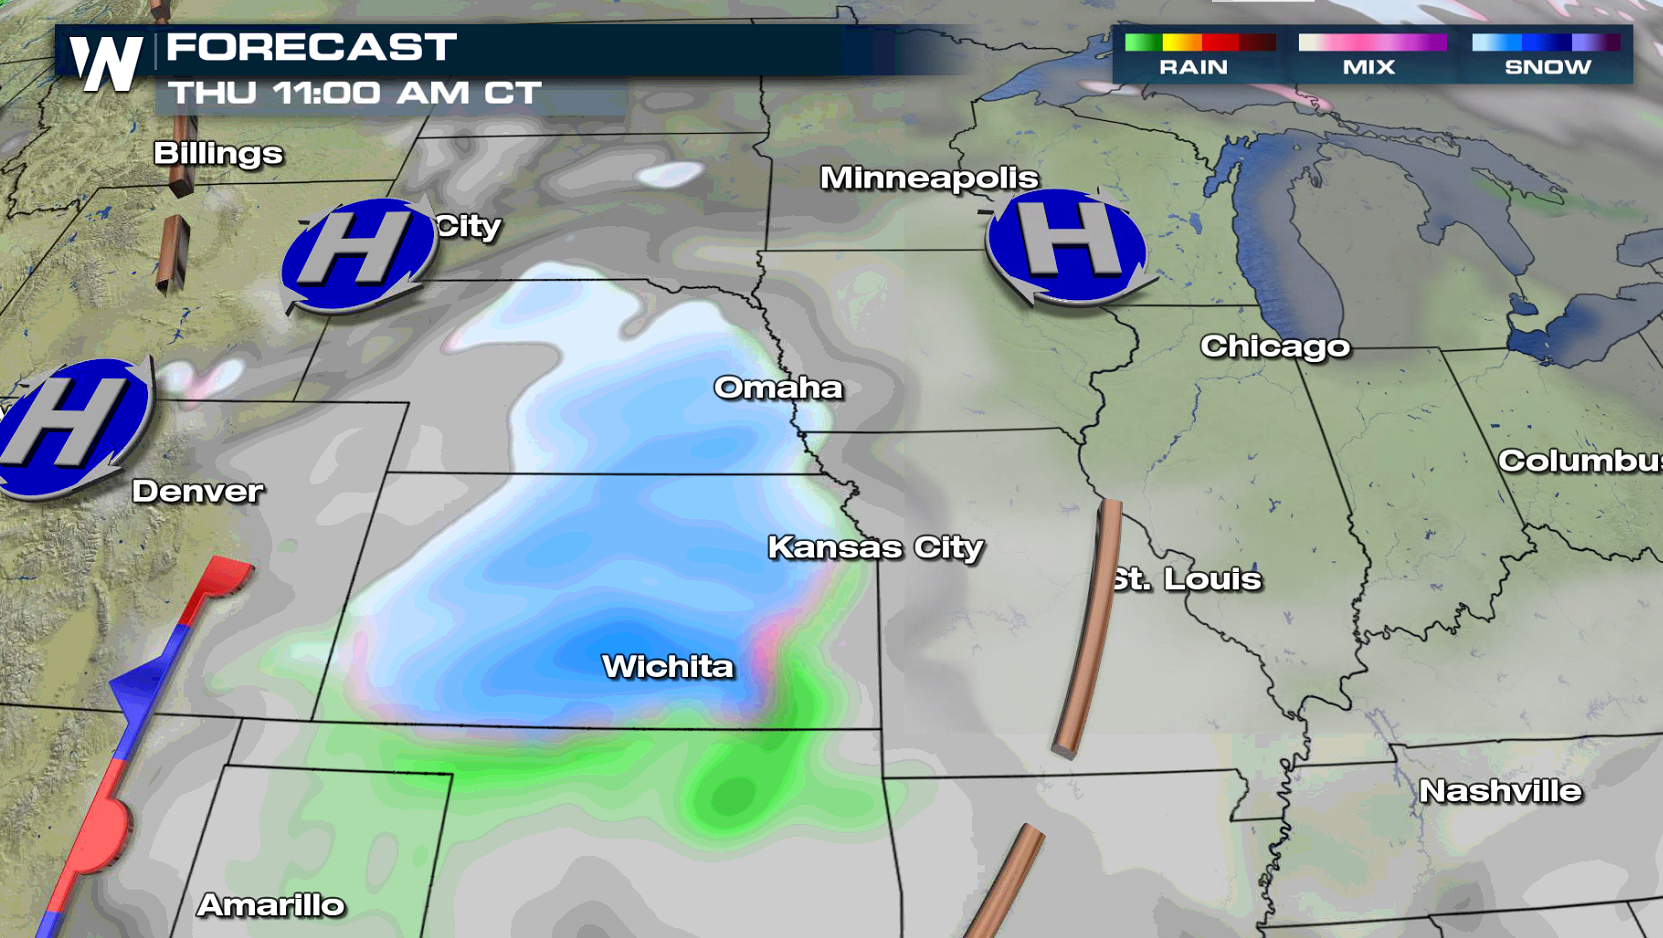 Snowfall Accumulations Ahead in the Central Plains